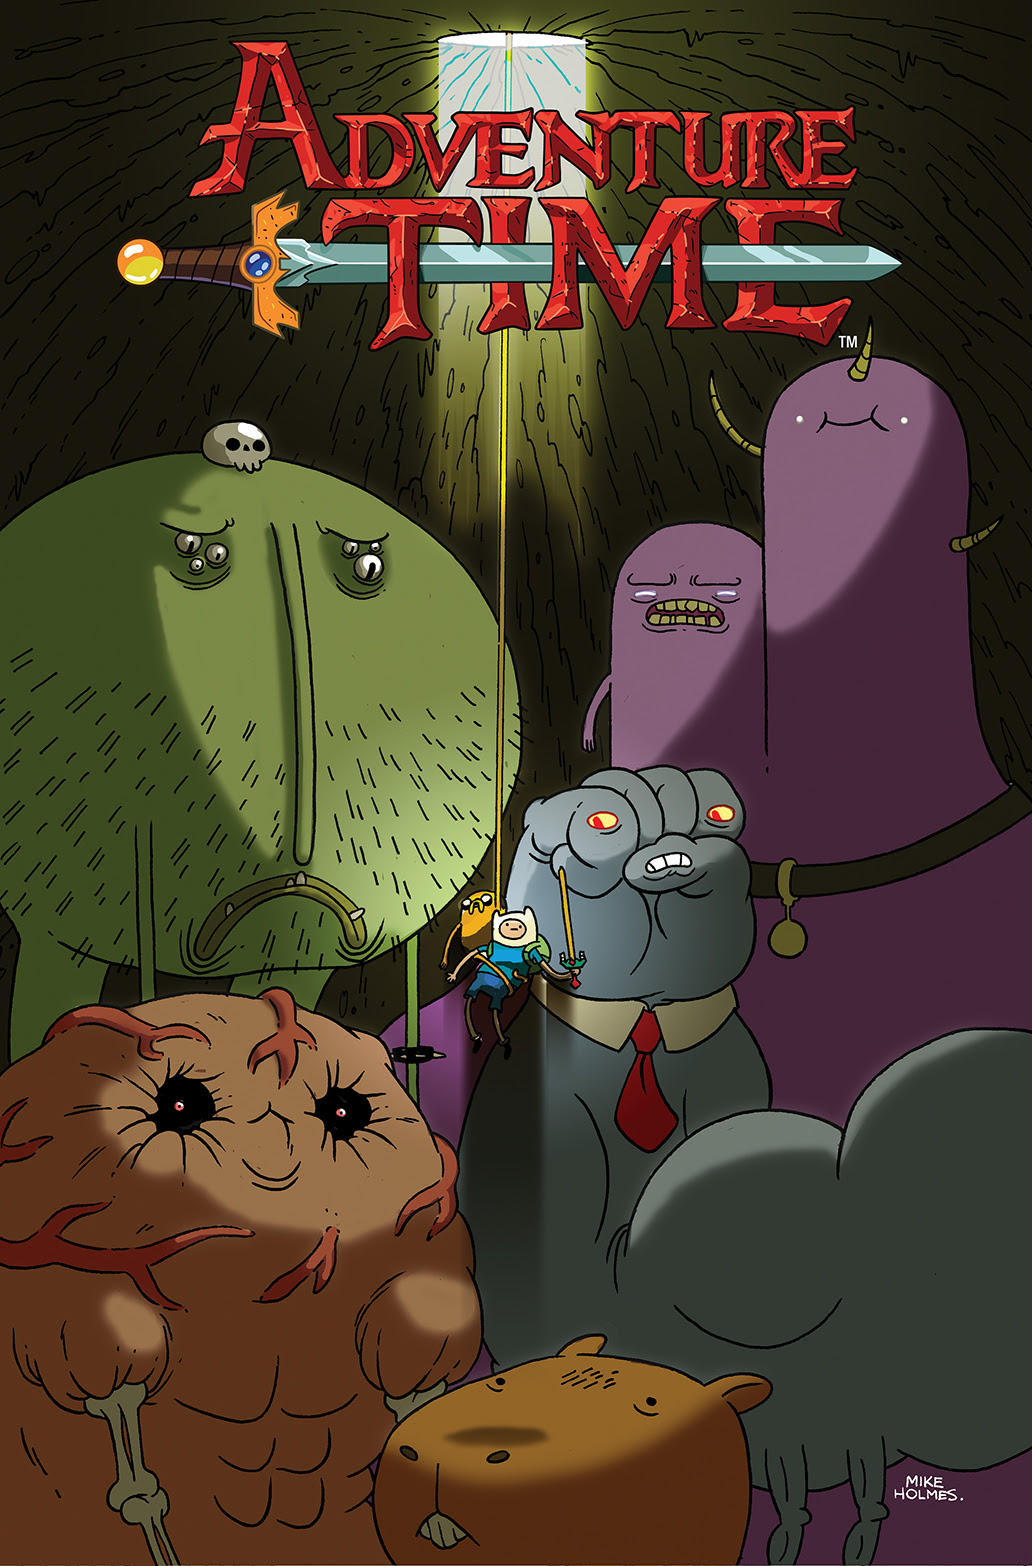 ADVENTURE TIME #28 Cover A by Mike Holmes